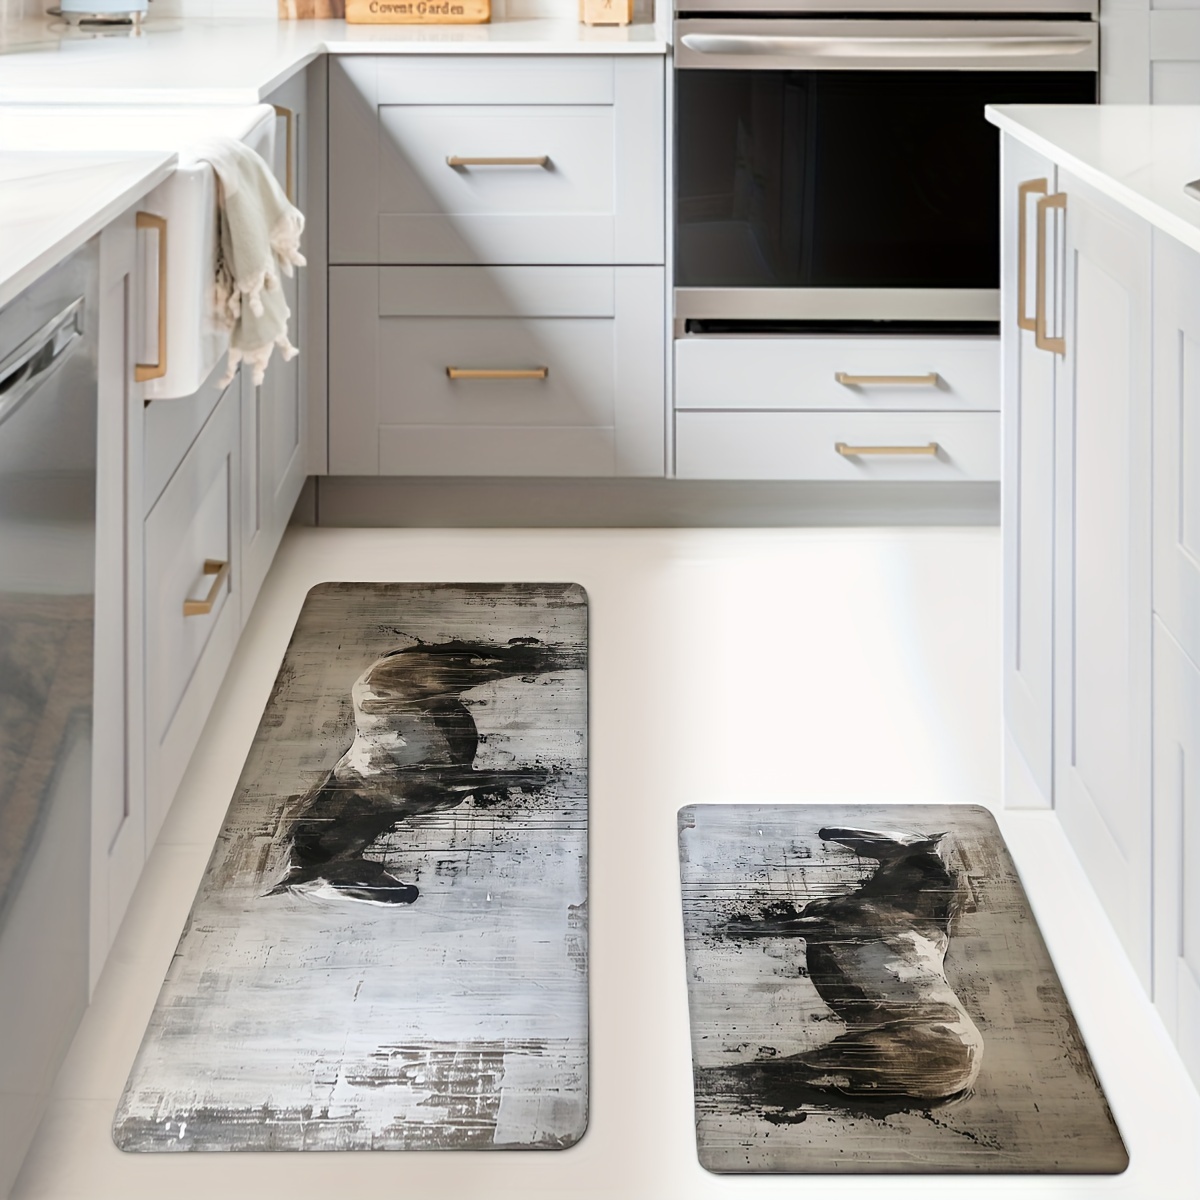 

1pc/2pcs, Horse Art Kitchen Mats, Non-slip And Durable Bathroom Pads For Floor, Comfortable Standing Runner Rugs, Carpets For Kitchen, Home, Office, Laundry Room, Bathroom, Spring Decor